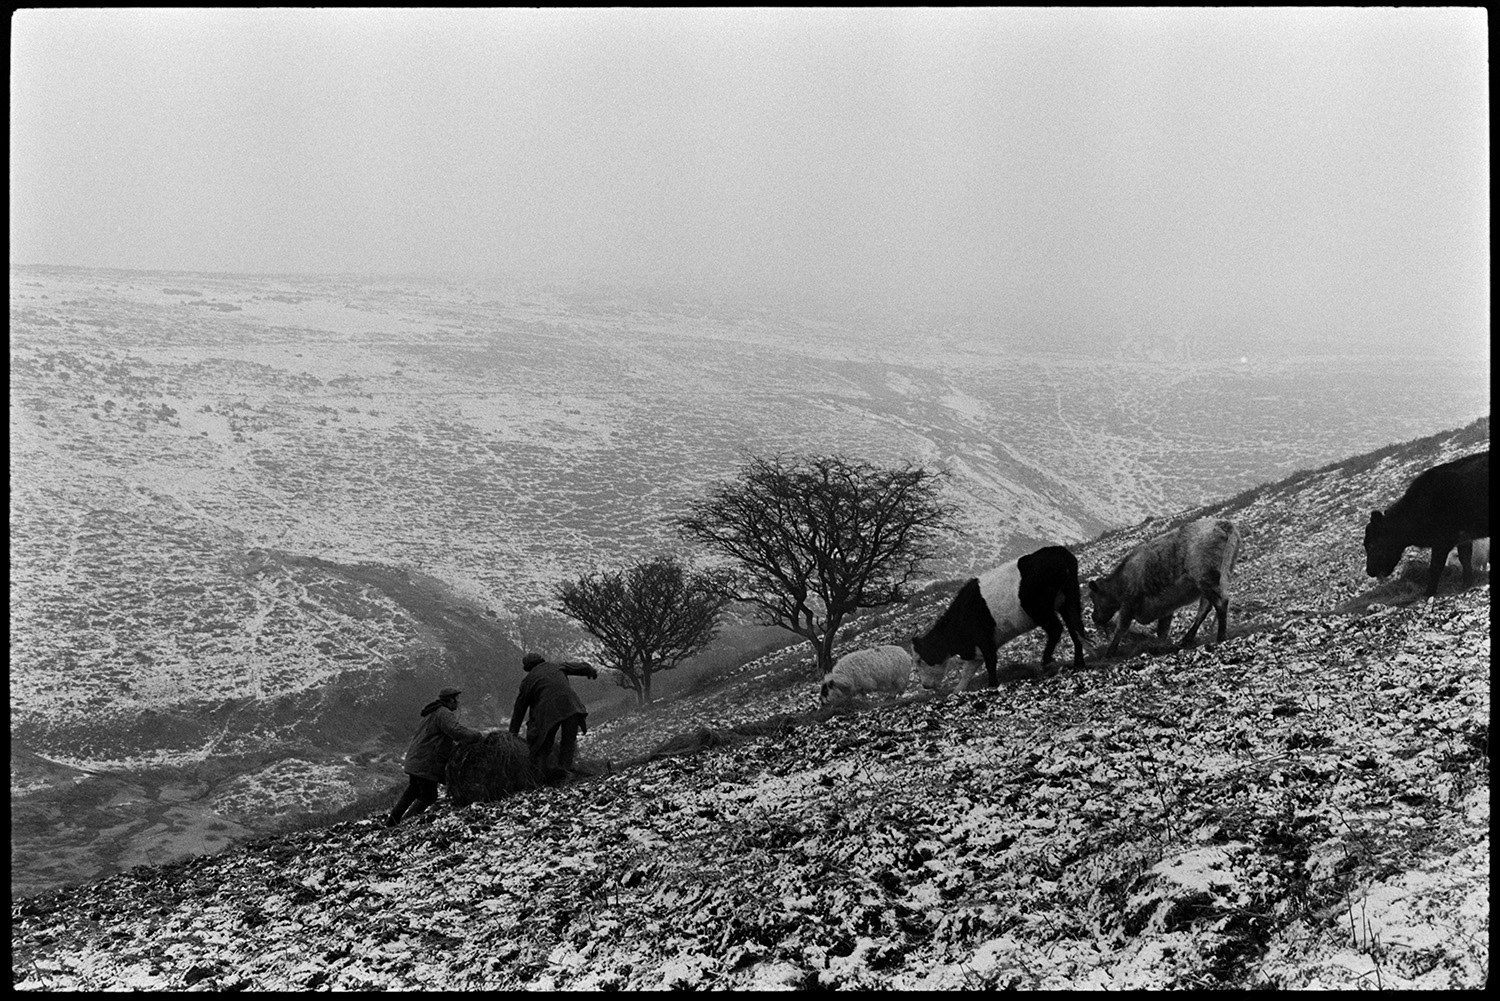 Snow. Farmers feeding cattle on moor, photographer taking pictures.
[Two farmers spreading hay on a steep snowy hillside, to feed sheep and cattle, near Chagford, Dartmoor.]